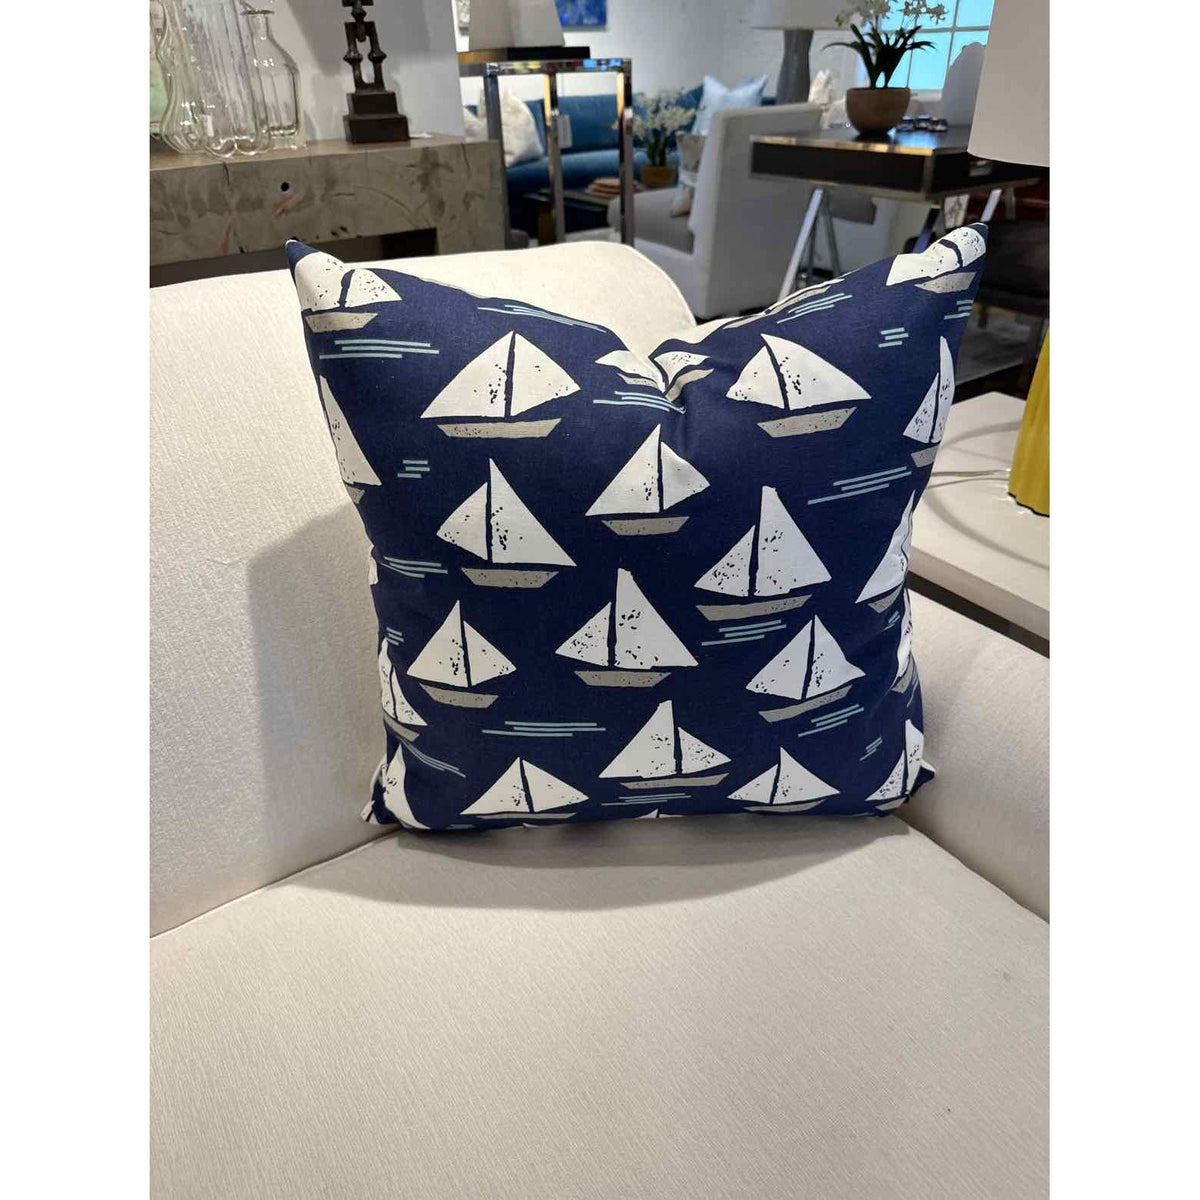 Pair of Sail Boats Over Blue Square Outdoor/Indoor Pillows 20"x20"